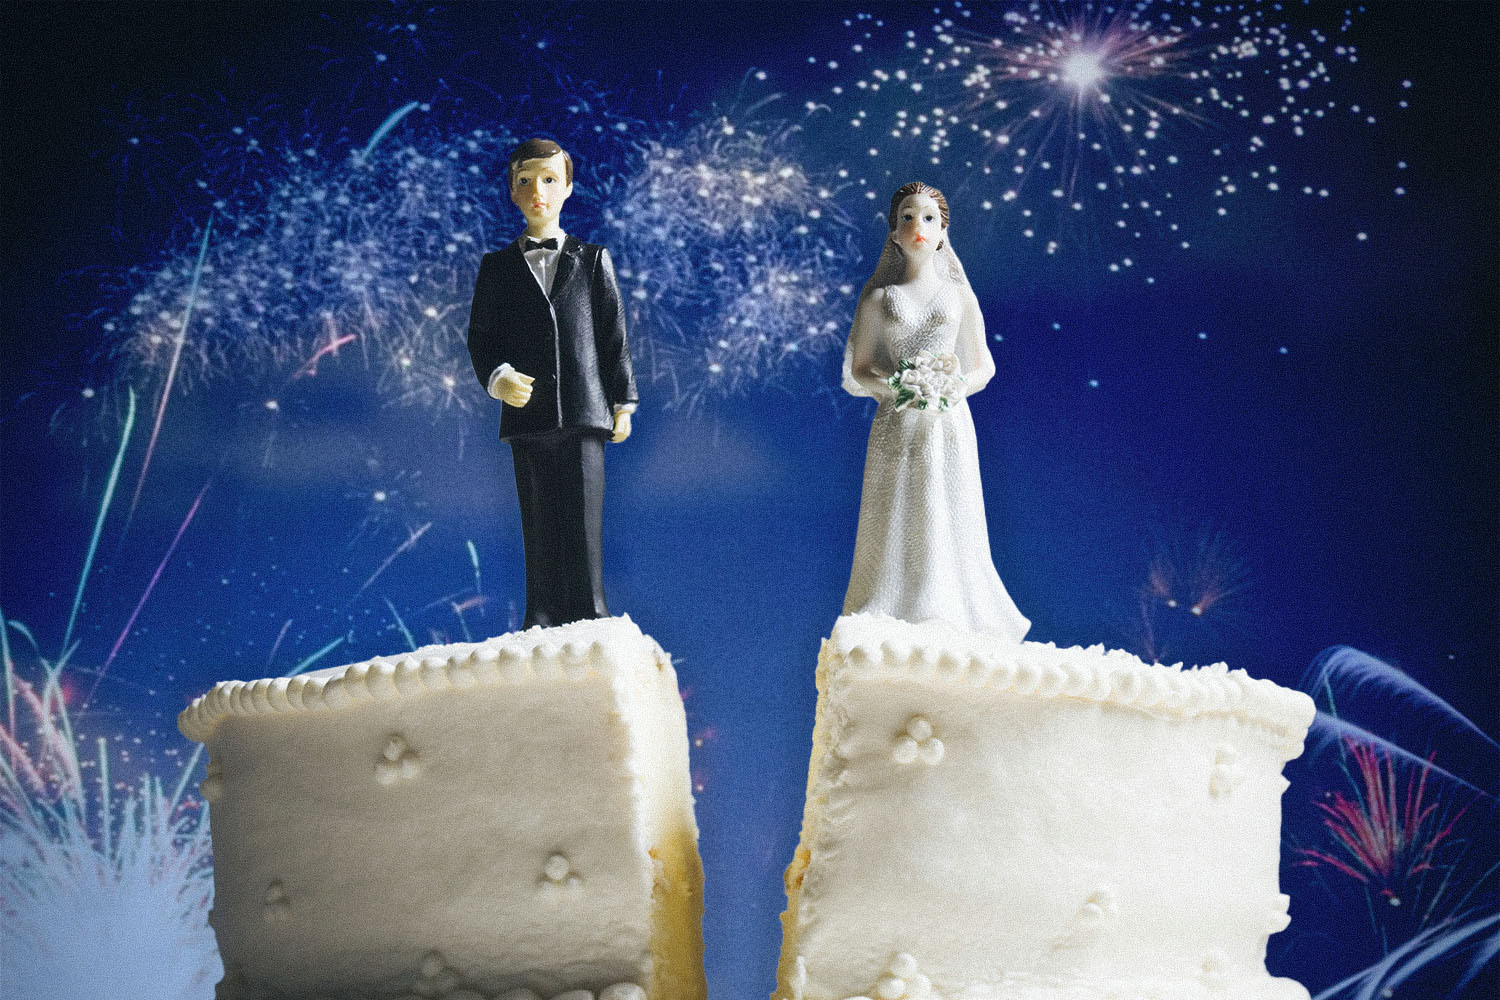 wedding cake split down the center, bride and groom cake toppers stand on either side. fireworks in the background.